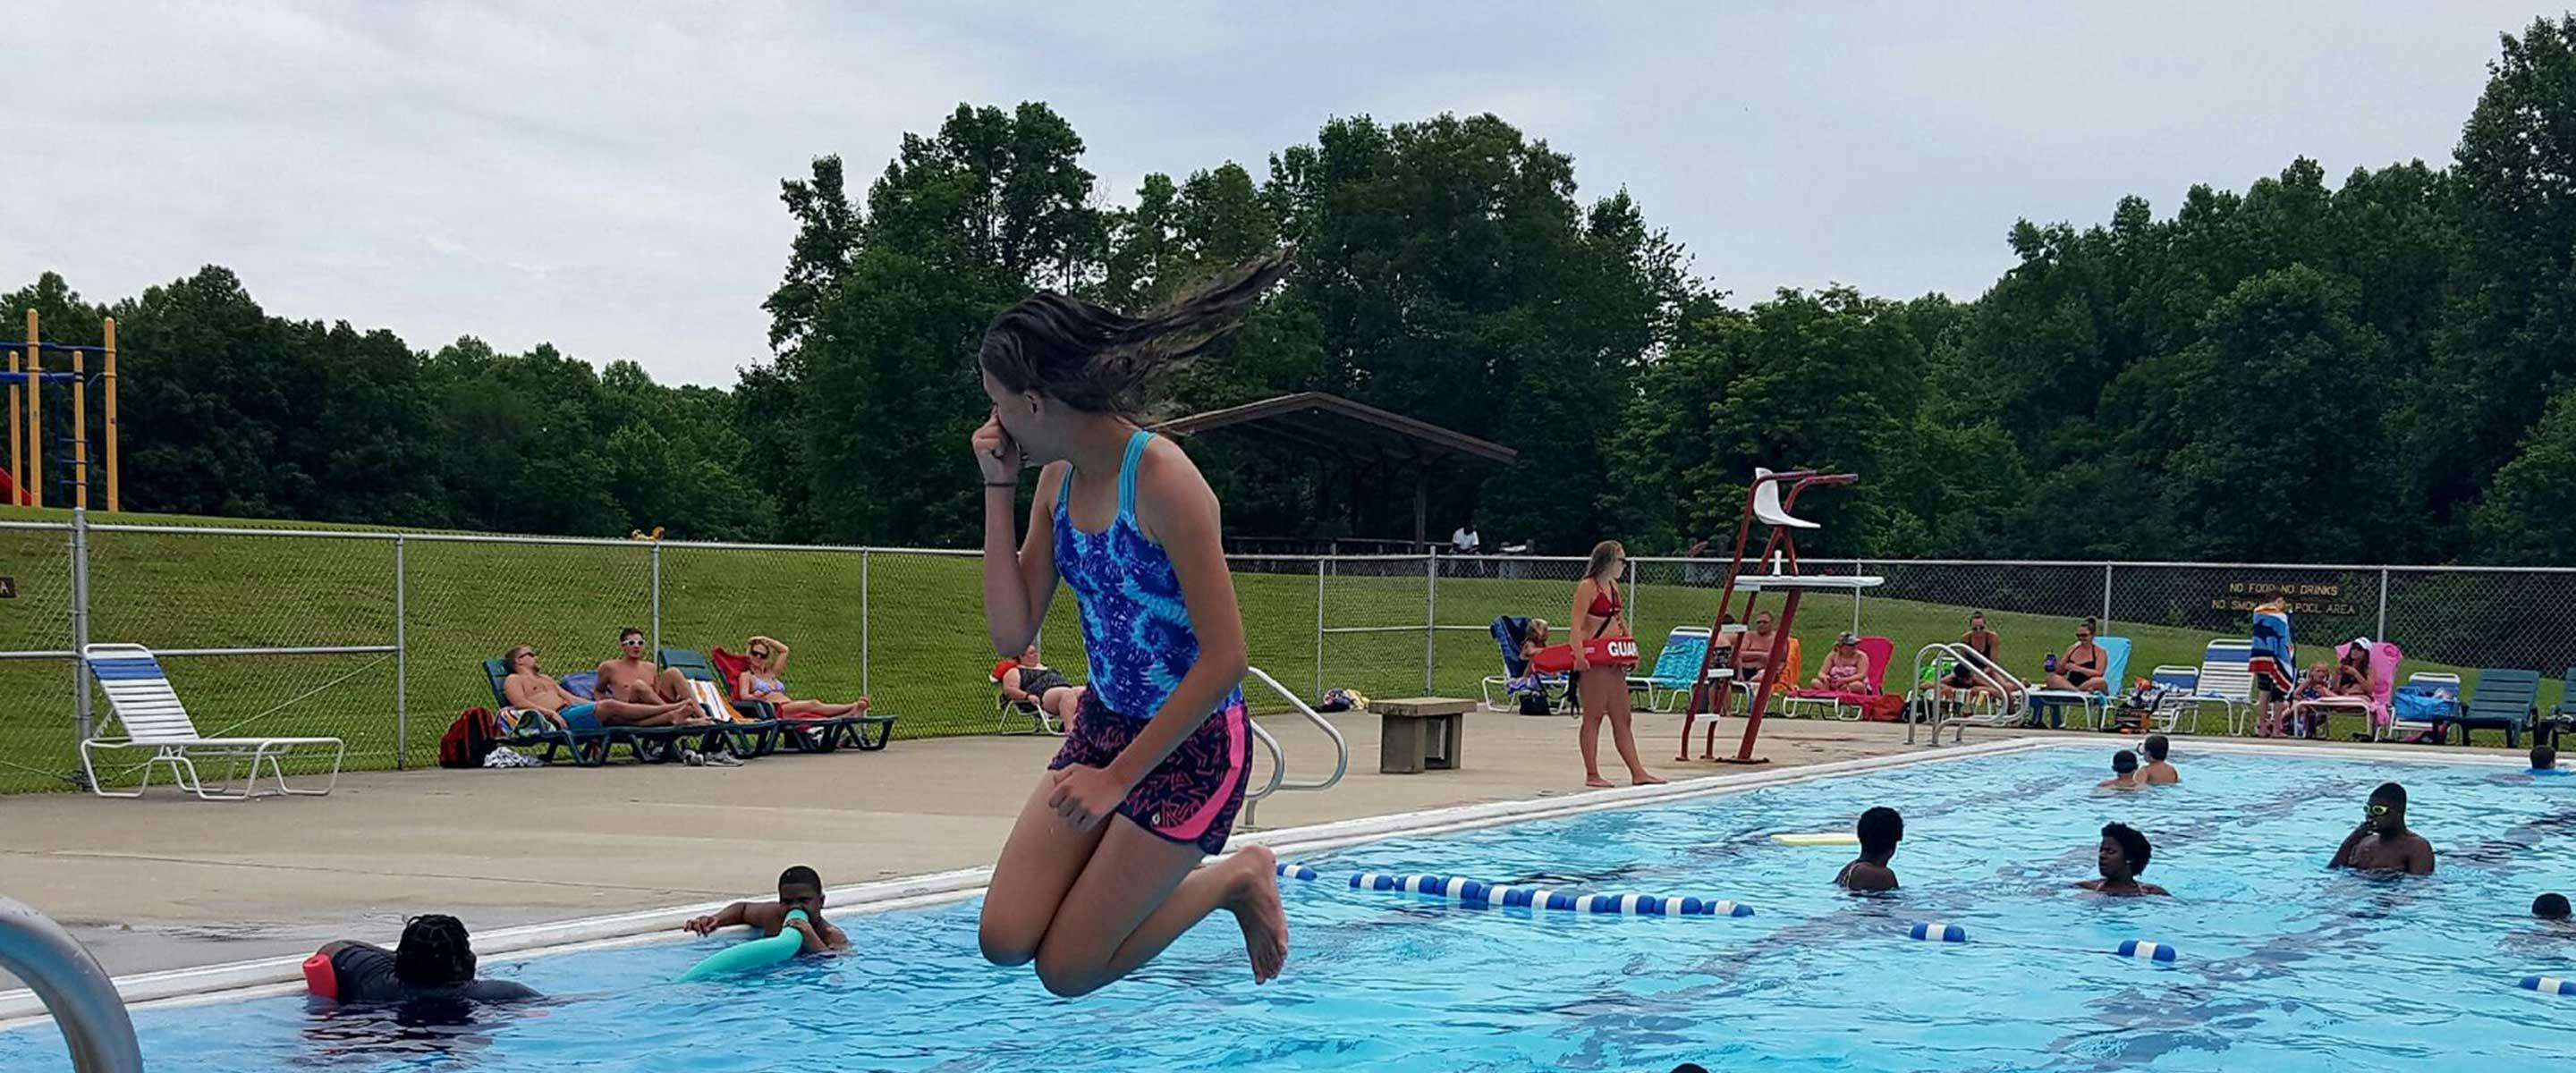 girl jumping into pool